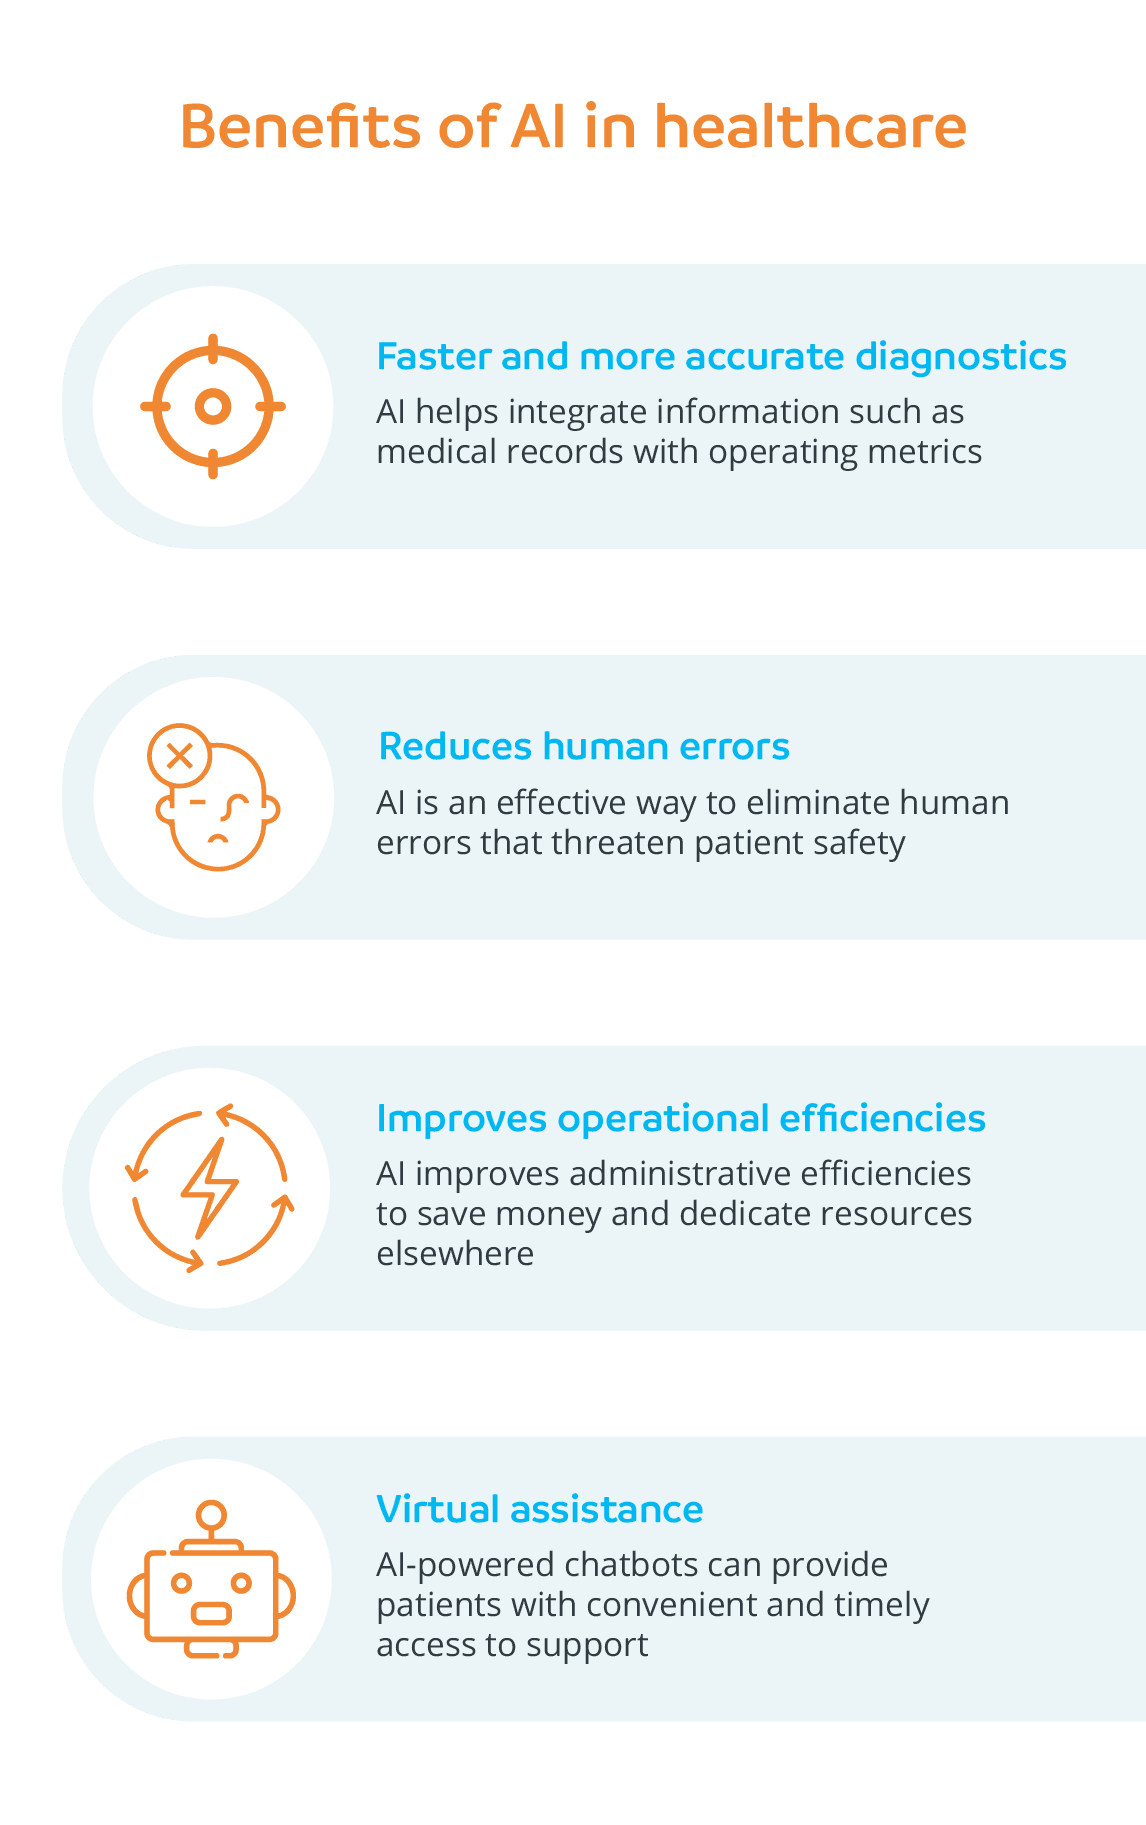 Benefits of AI in healthcare